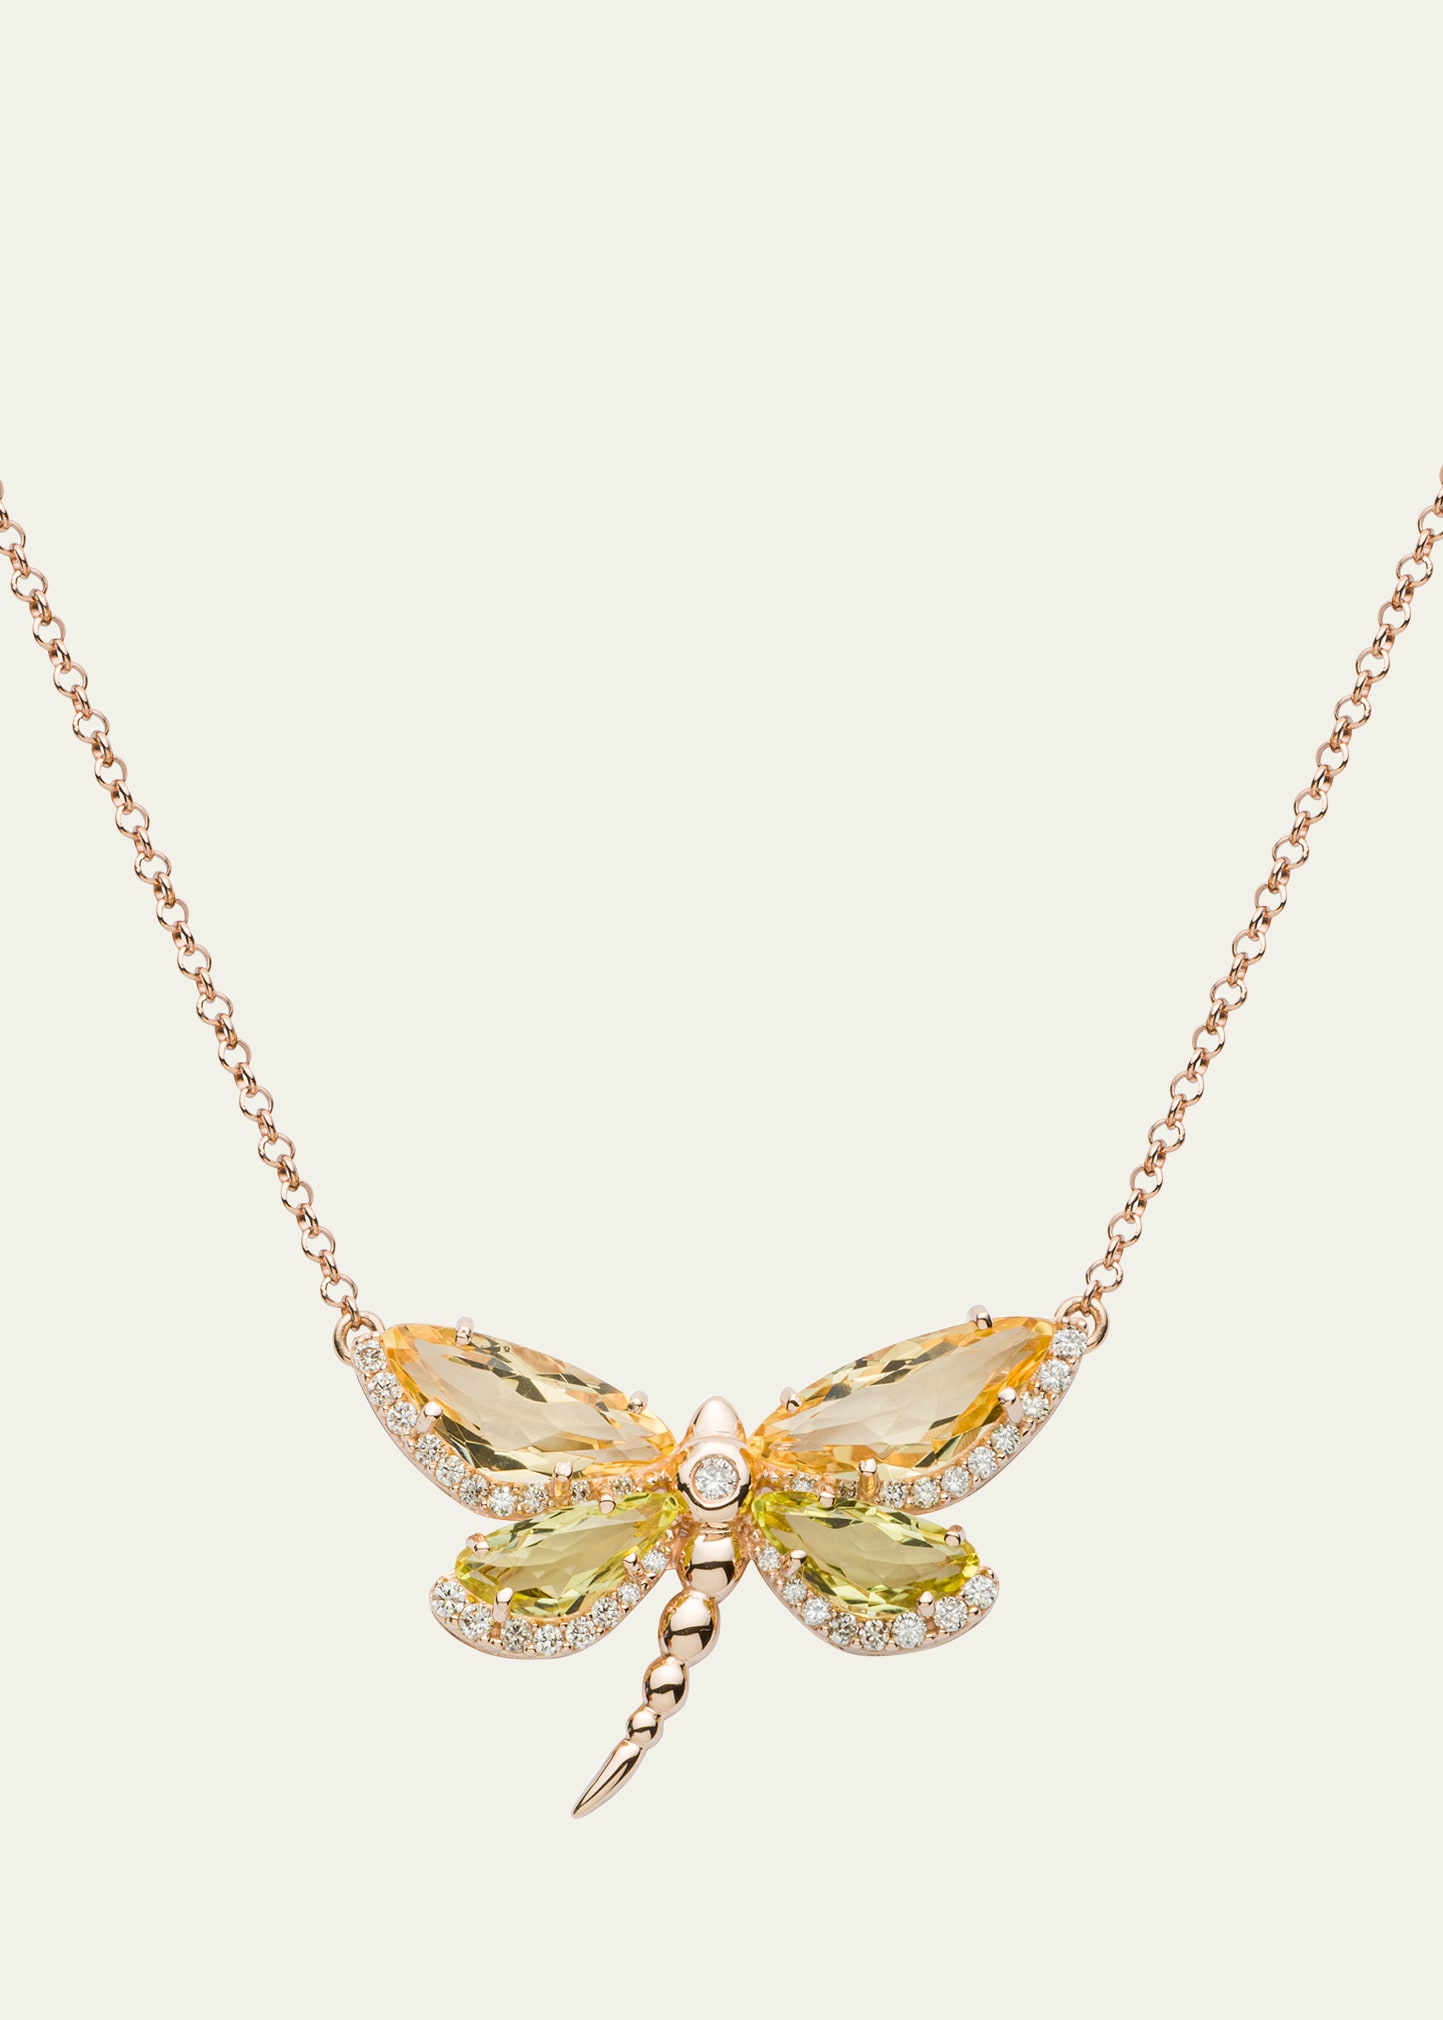 Daniella Kronfle Citrine And Quartz Dragonfly Necklace With Diamonds In Gold